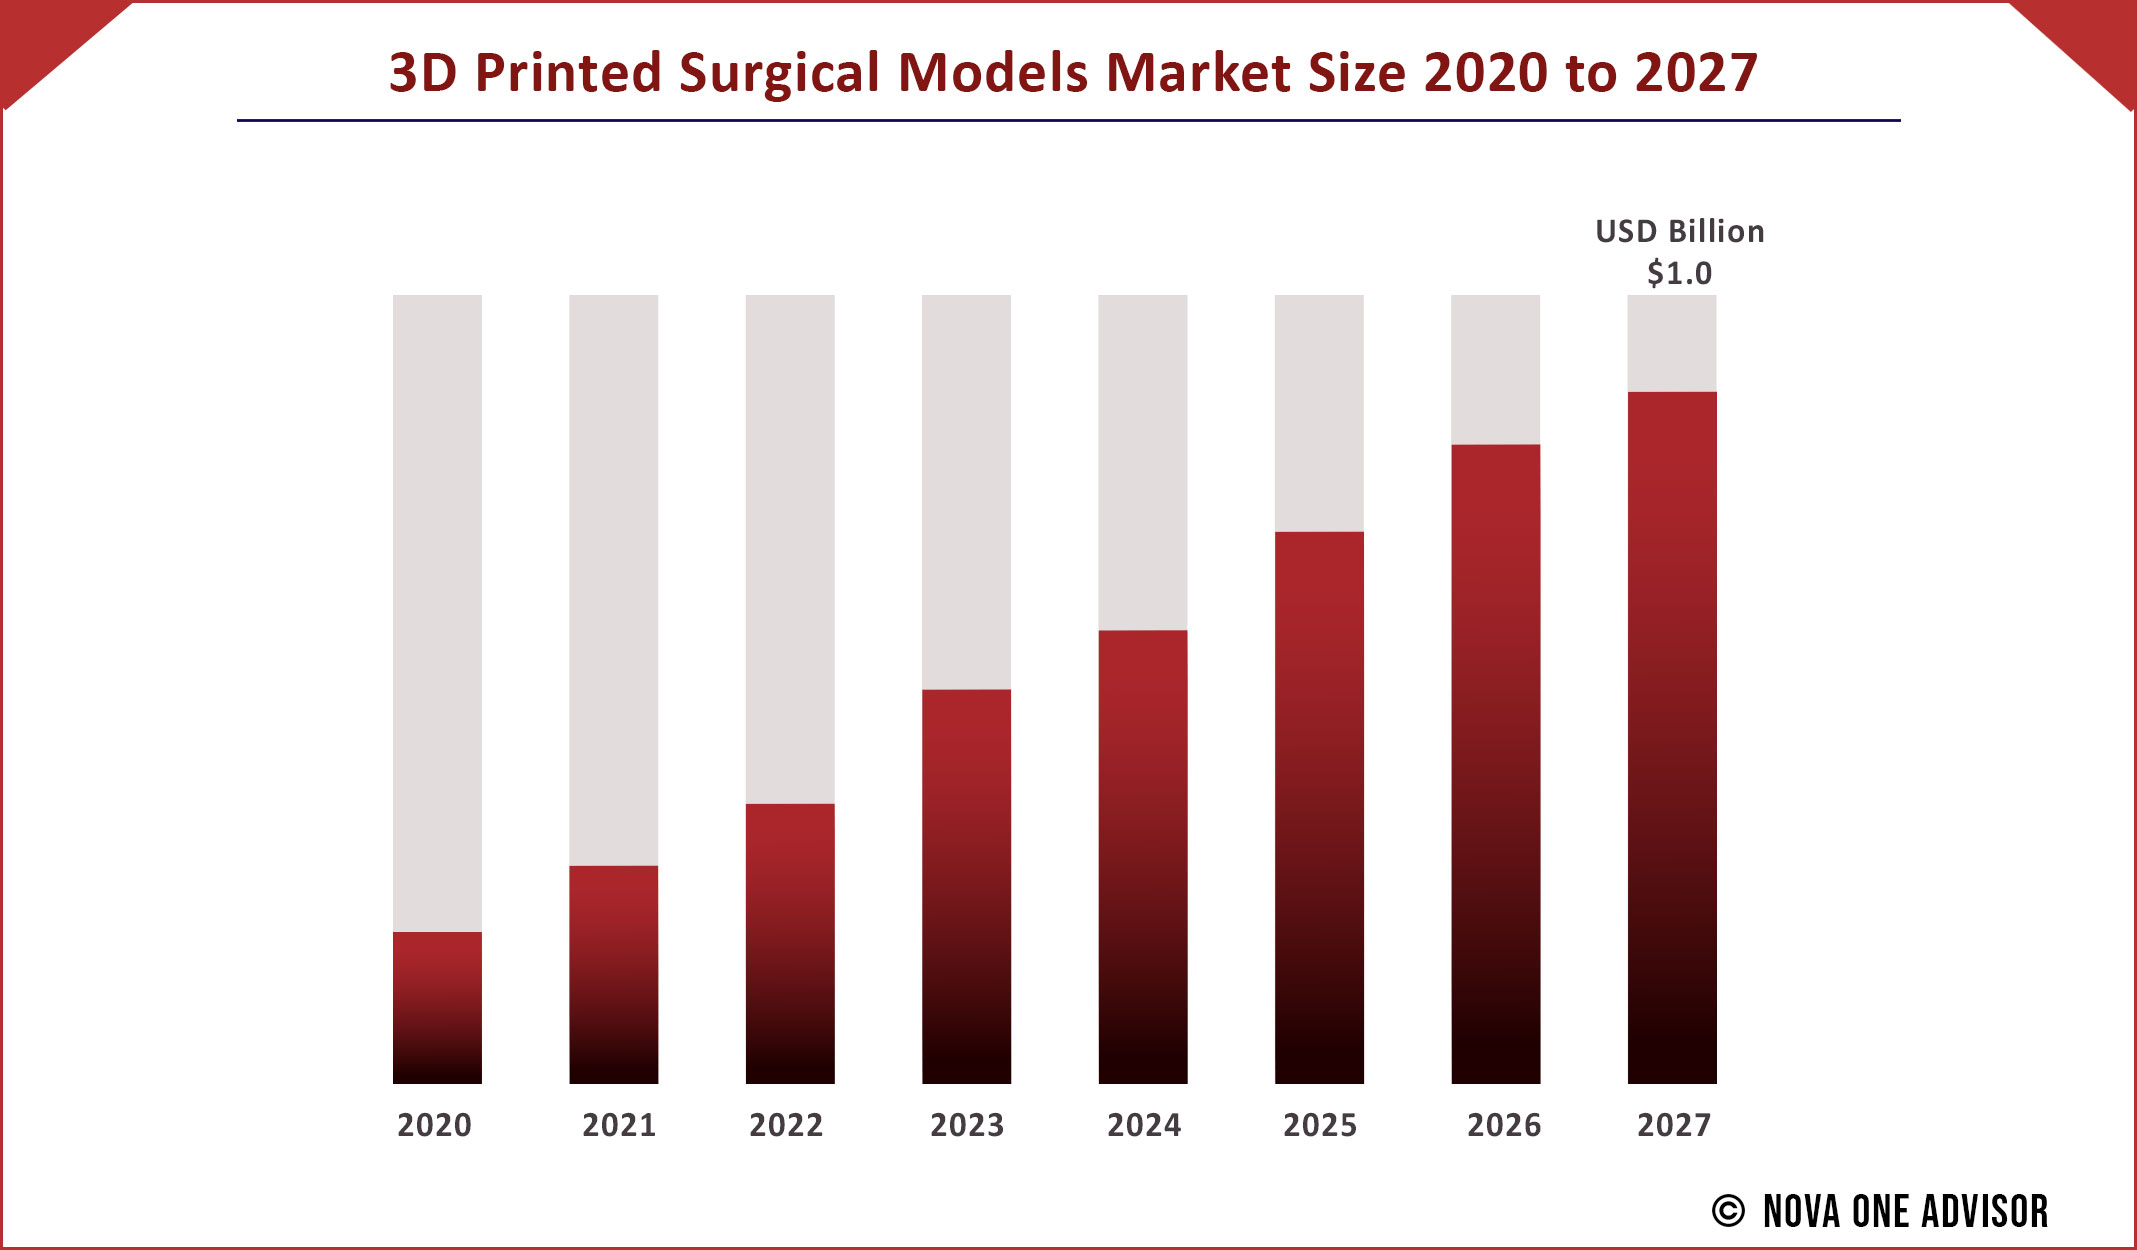 3D Printed Surgical Models Market Size 2020 to 2027